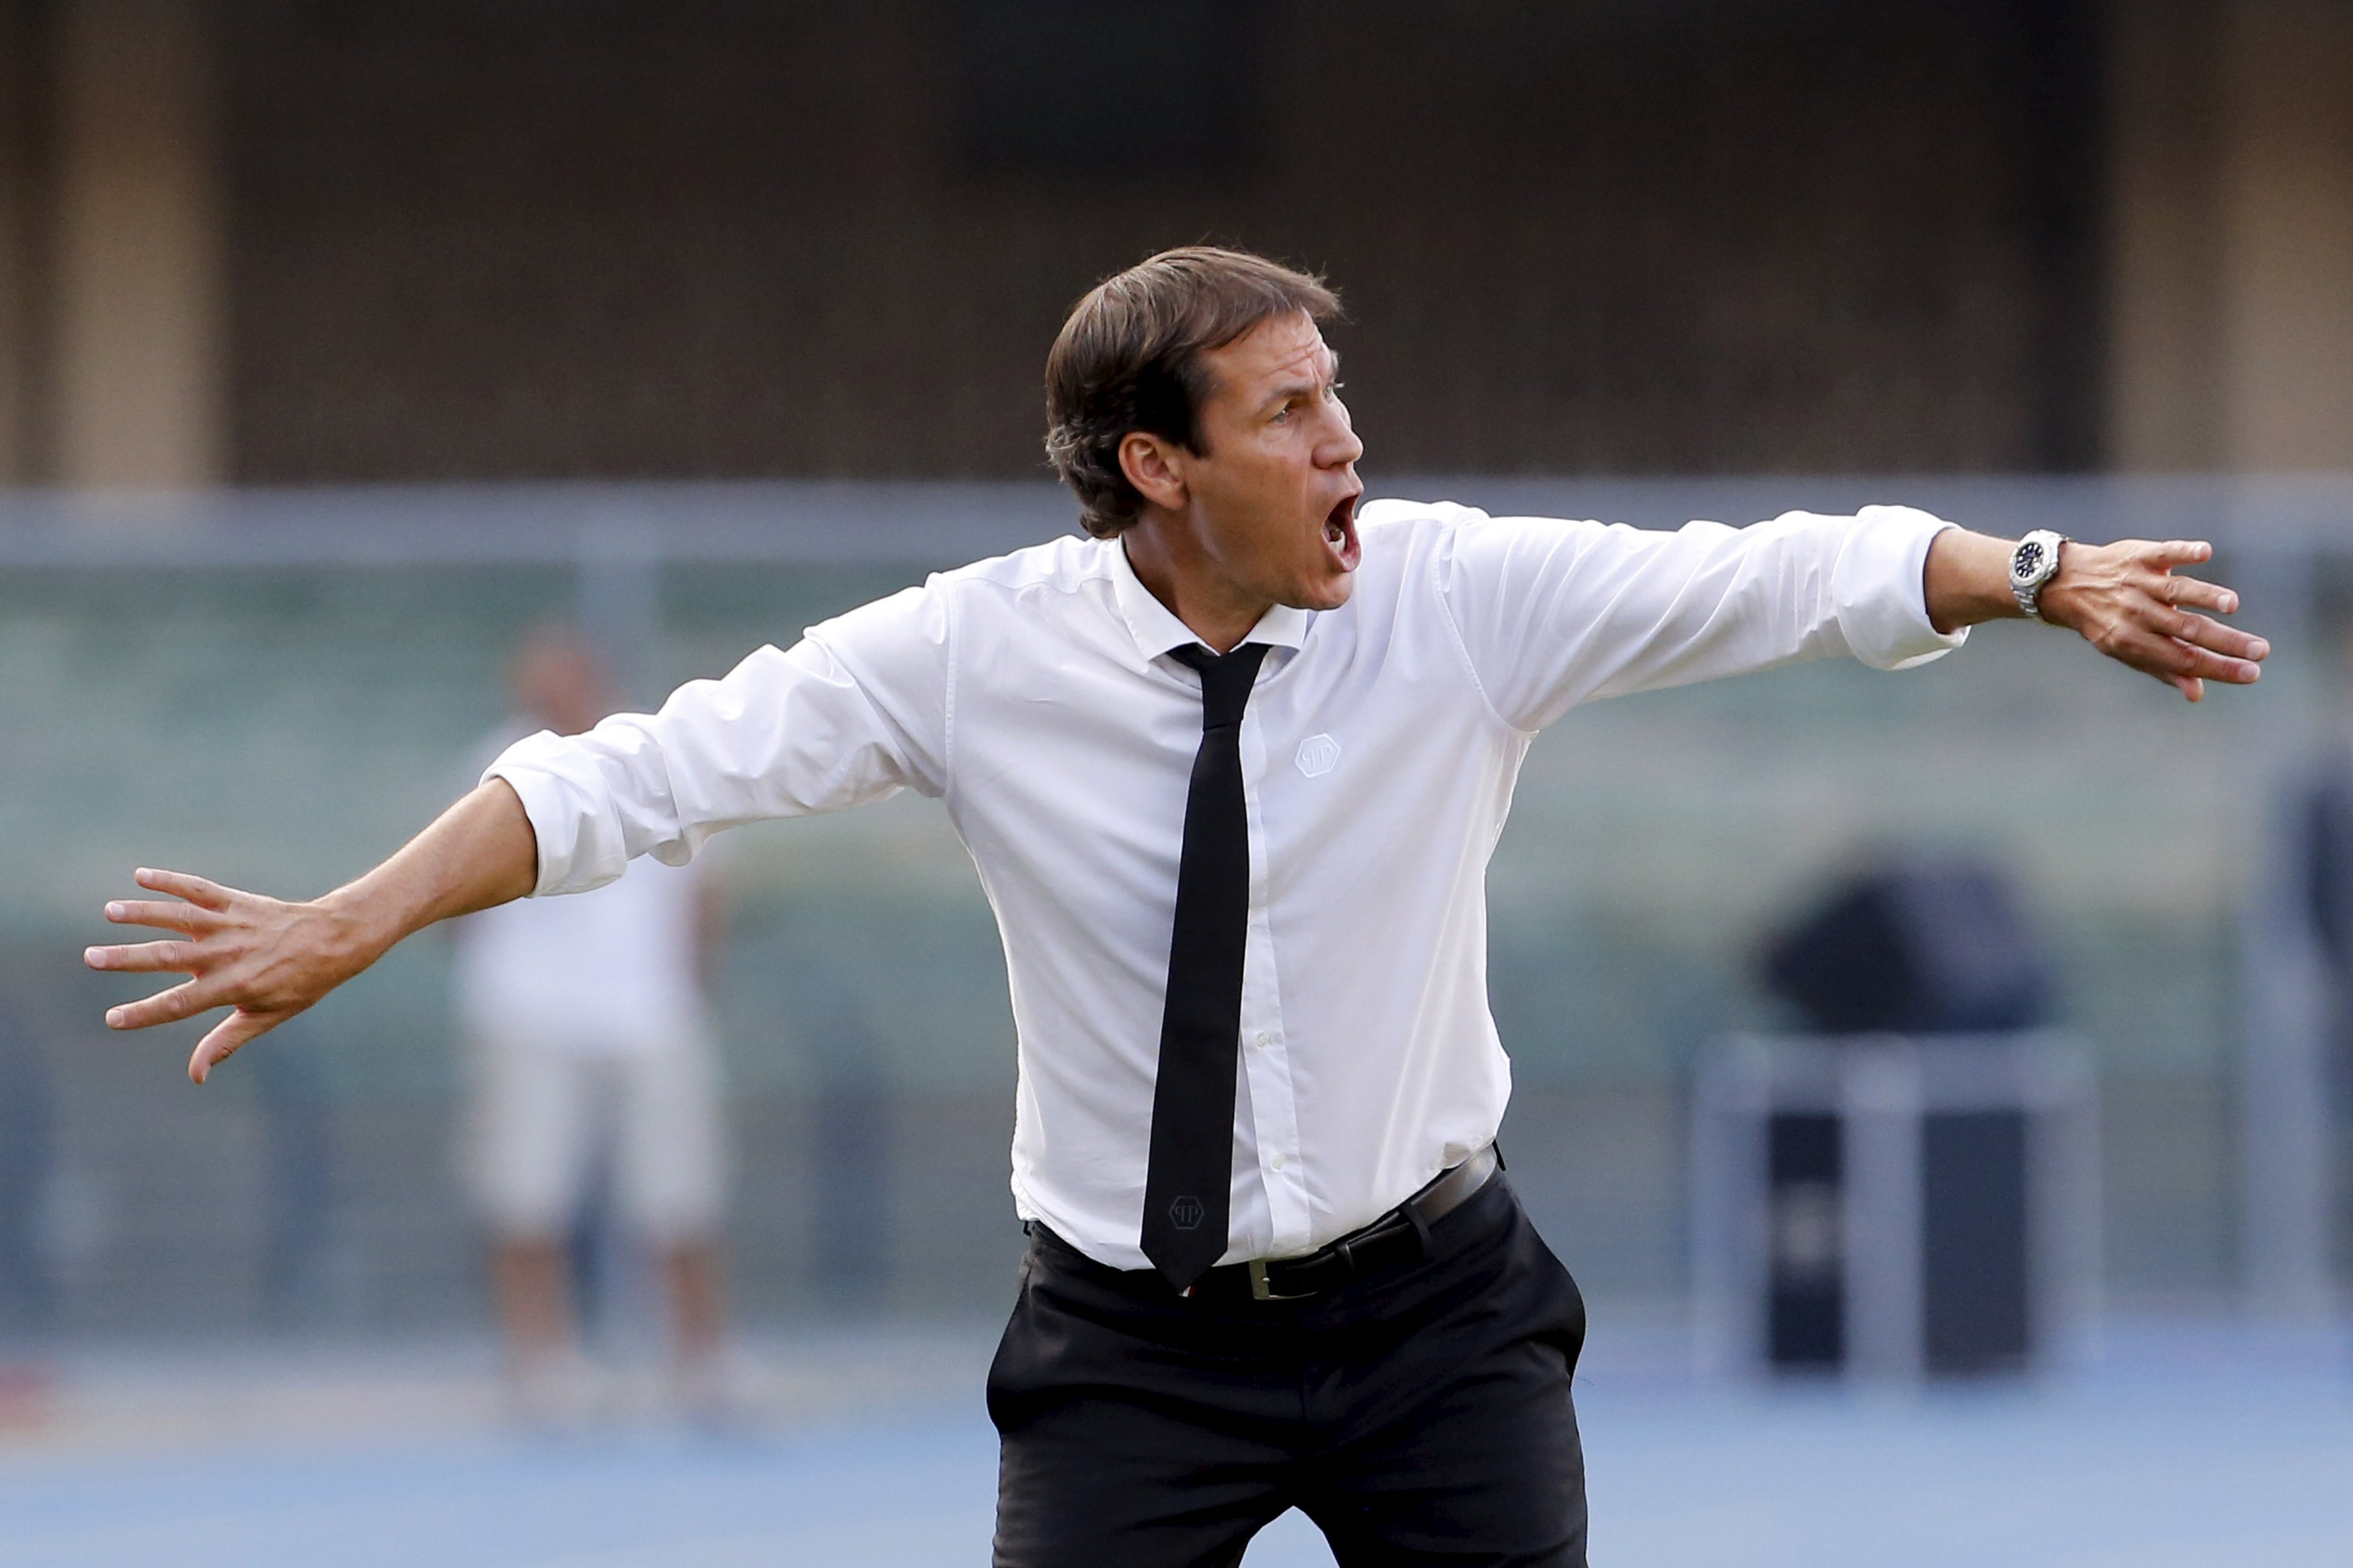 AS Roma's coach Rudi Garcia gives instructions to his players during their Serie A soccer match against Hellas Verona in Verona August 22, 2015. REUTERS/Giampiero Sposito